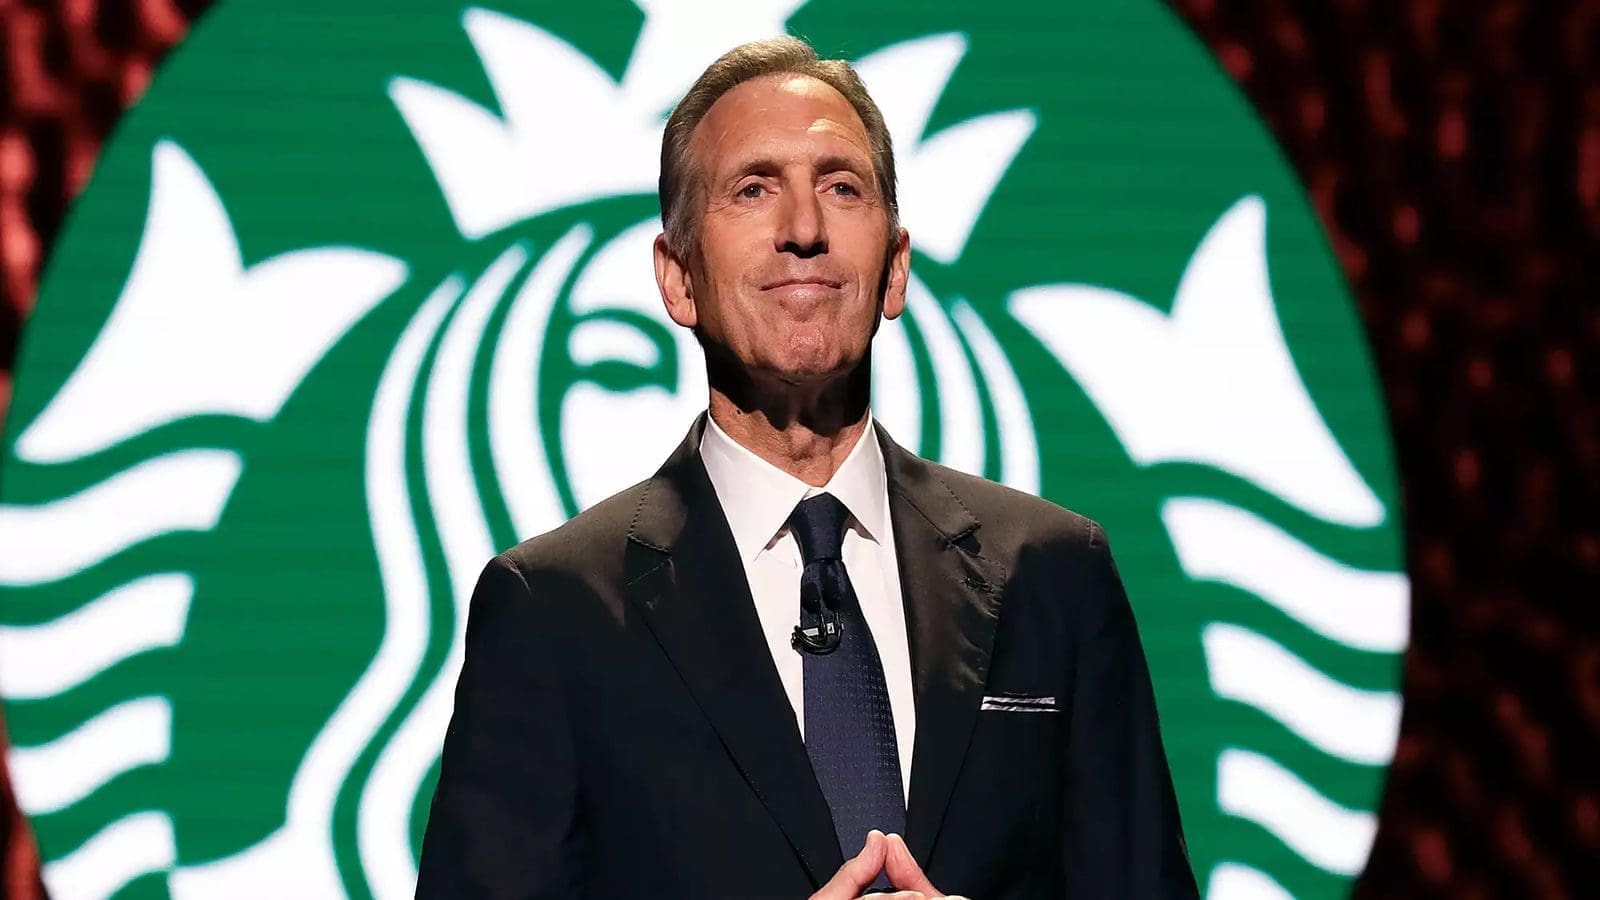 Howard Schultz to continue leading Starbucks until 2023 amid growing unionization efforts by workers